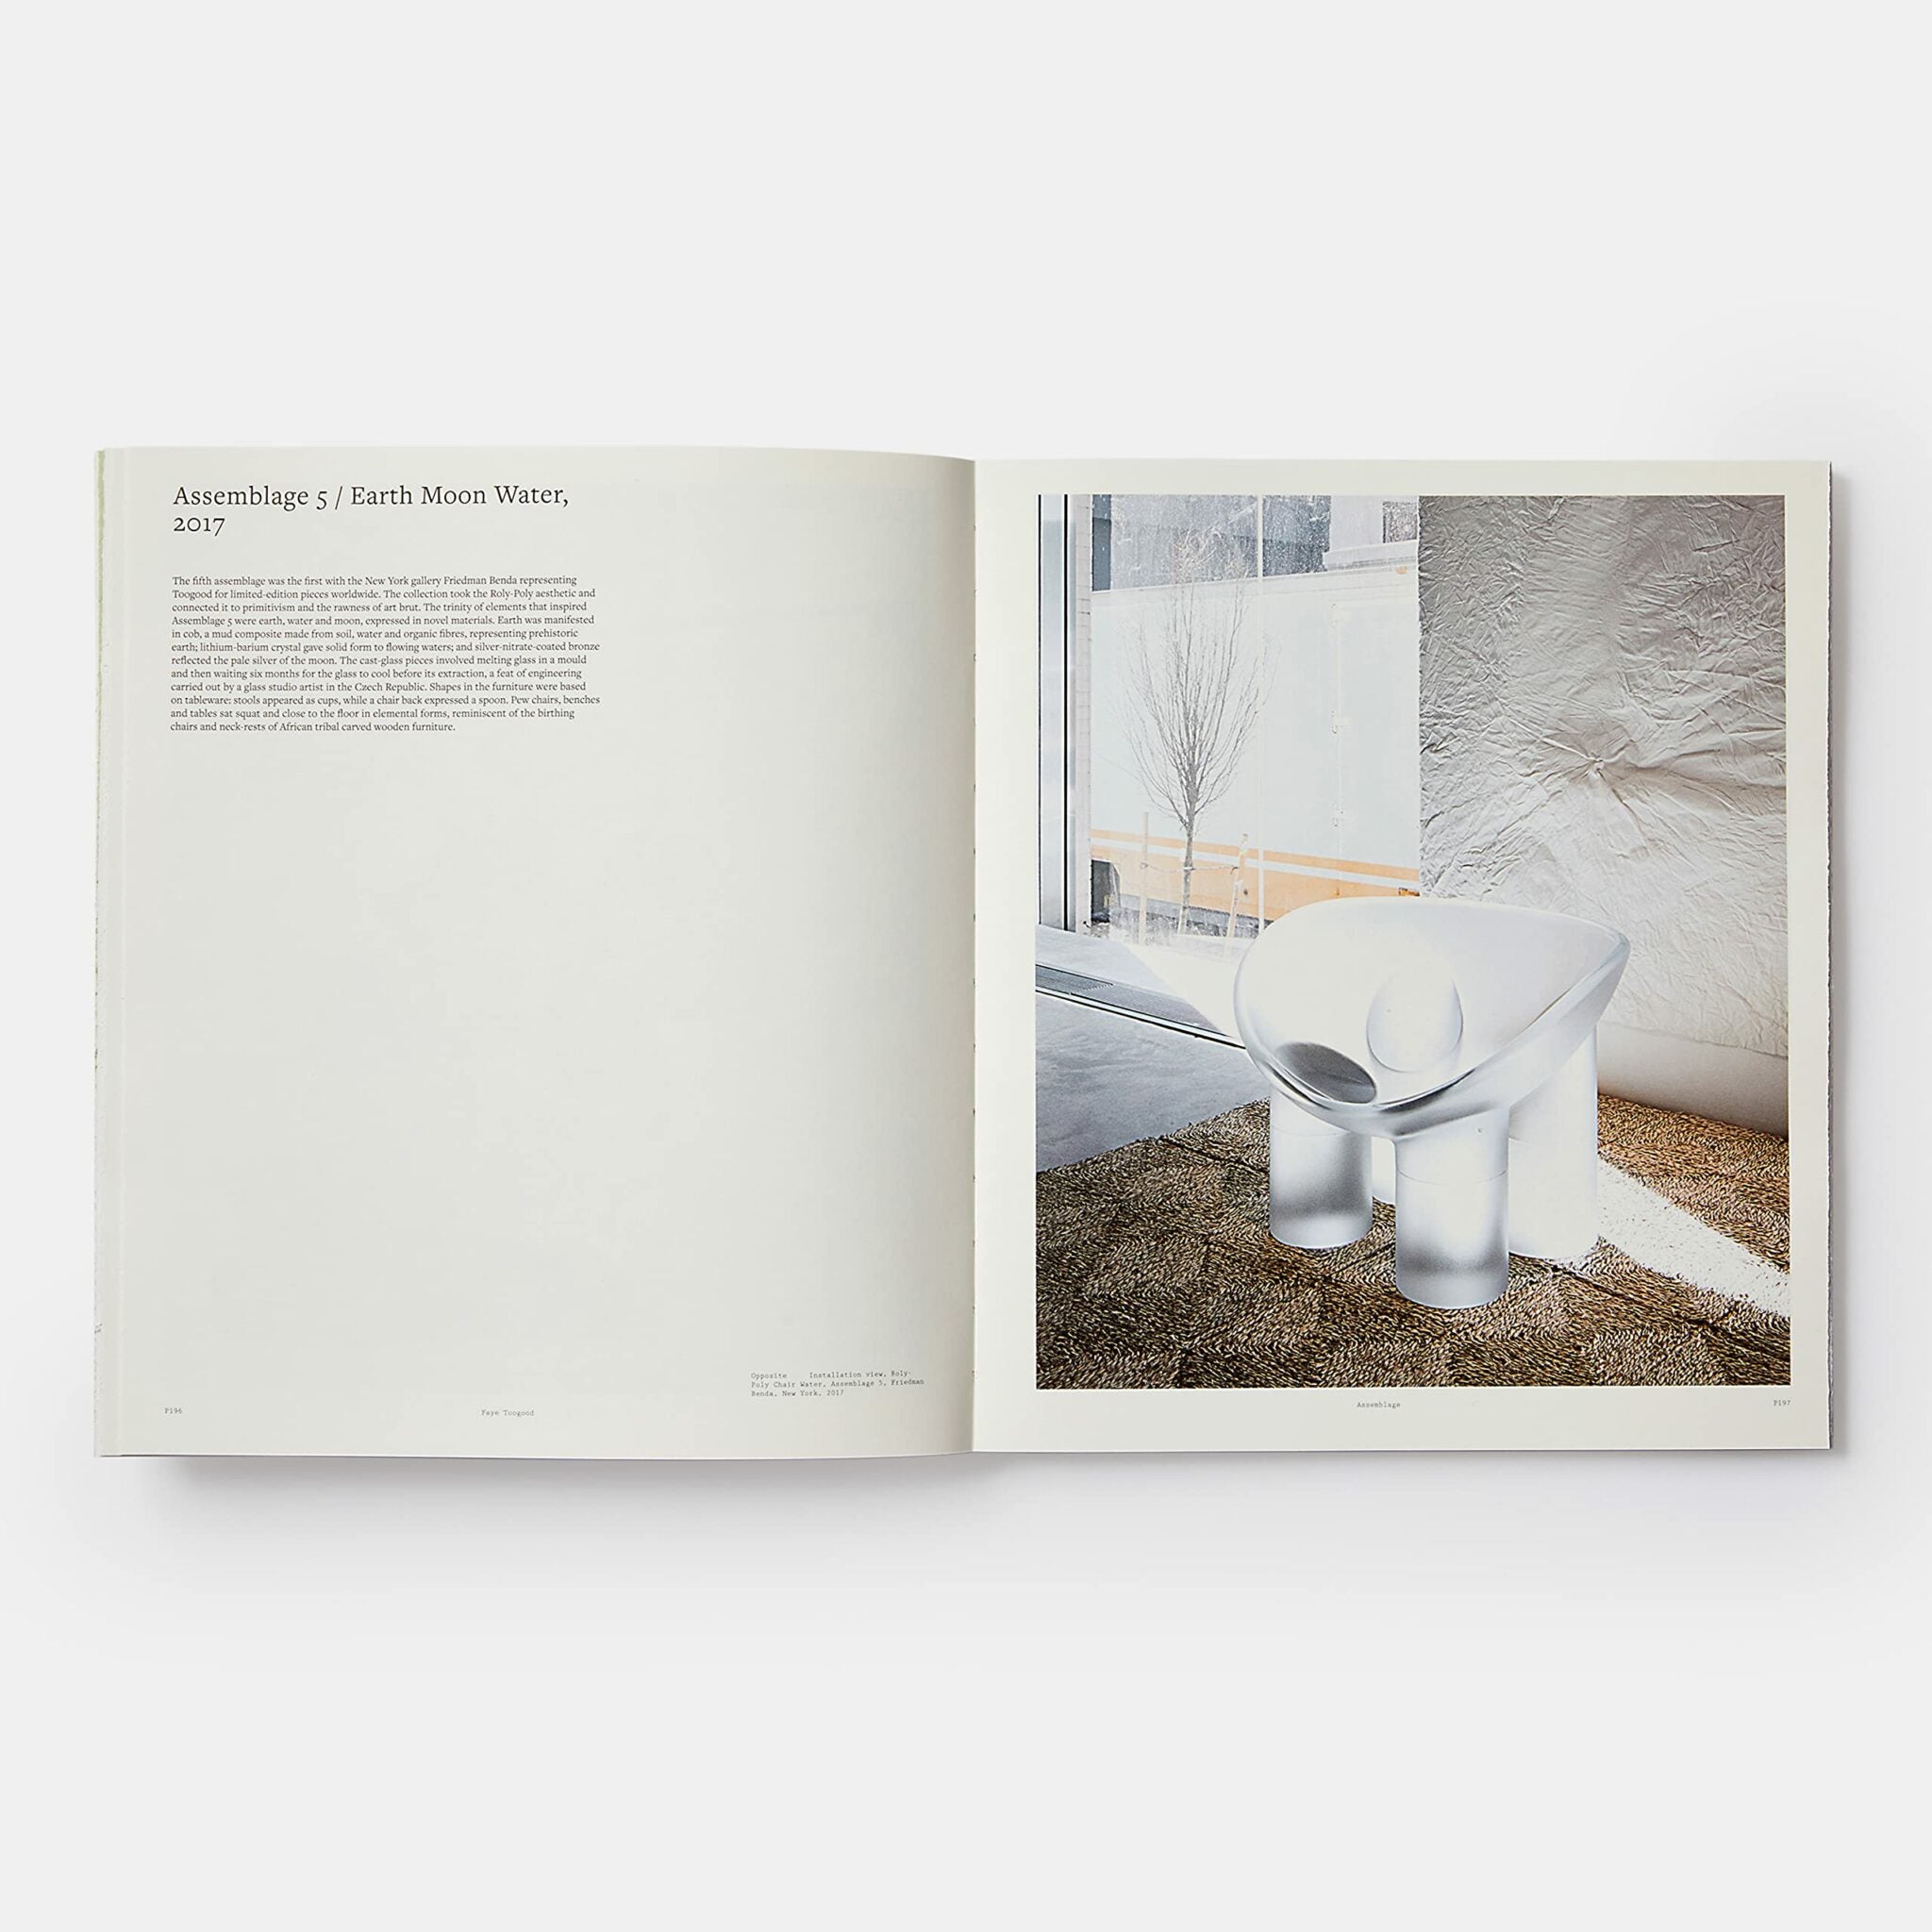 Faye Toogood: Drawing, Material, Sculpture, Landscape Book Phaidon